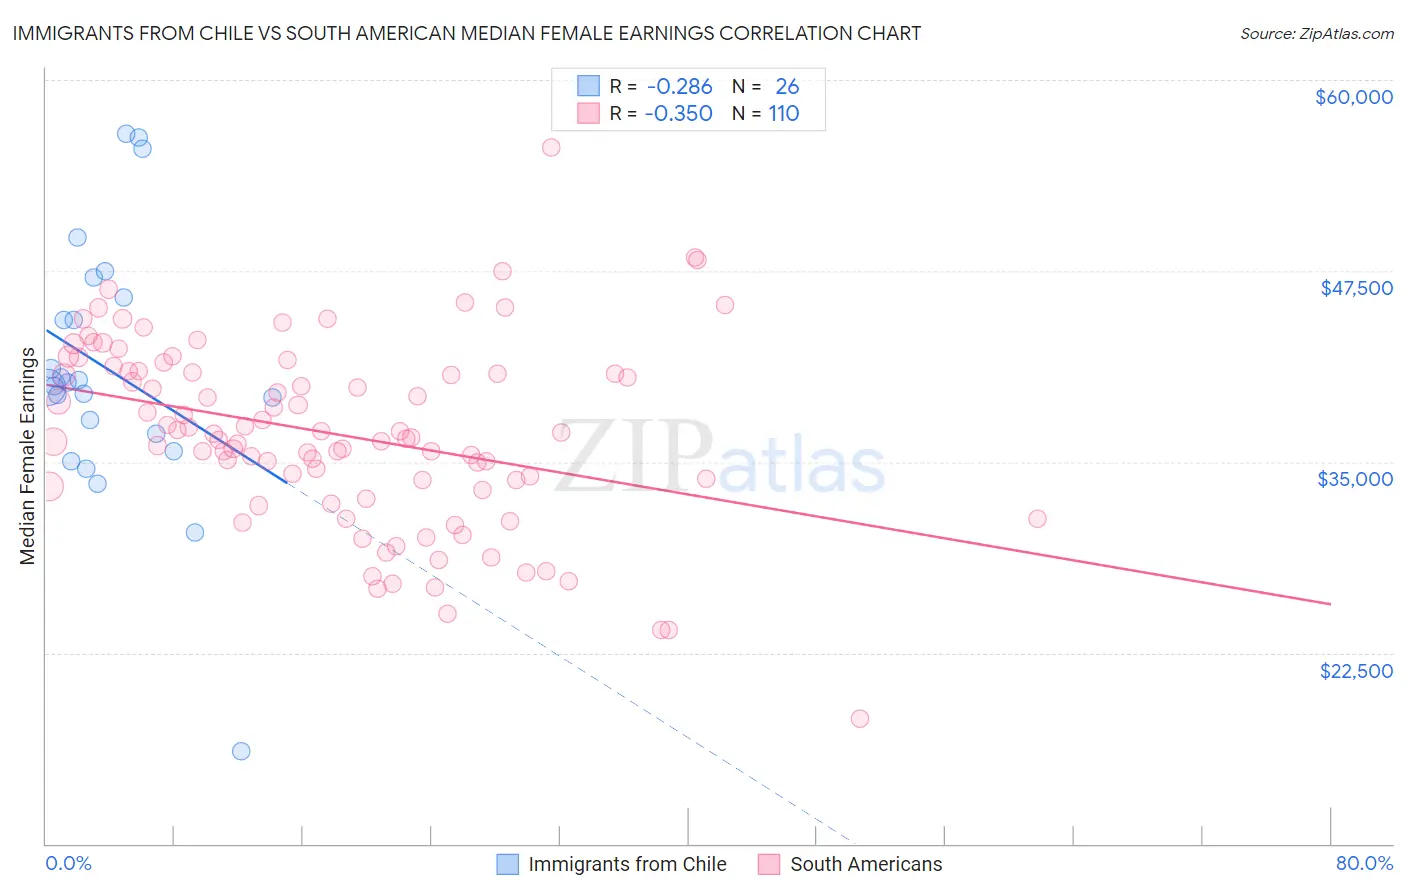 Immigrants from Chile vs South American Median Female Earnings